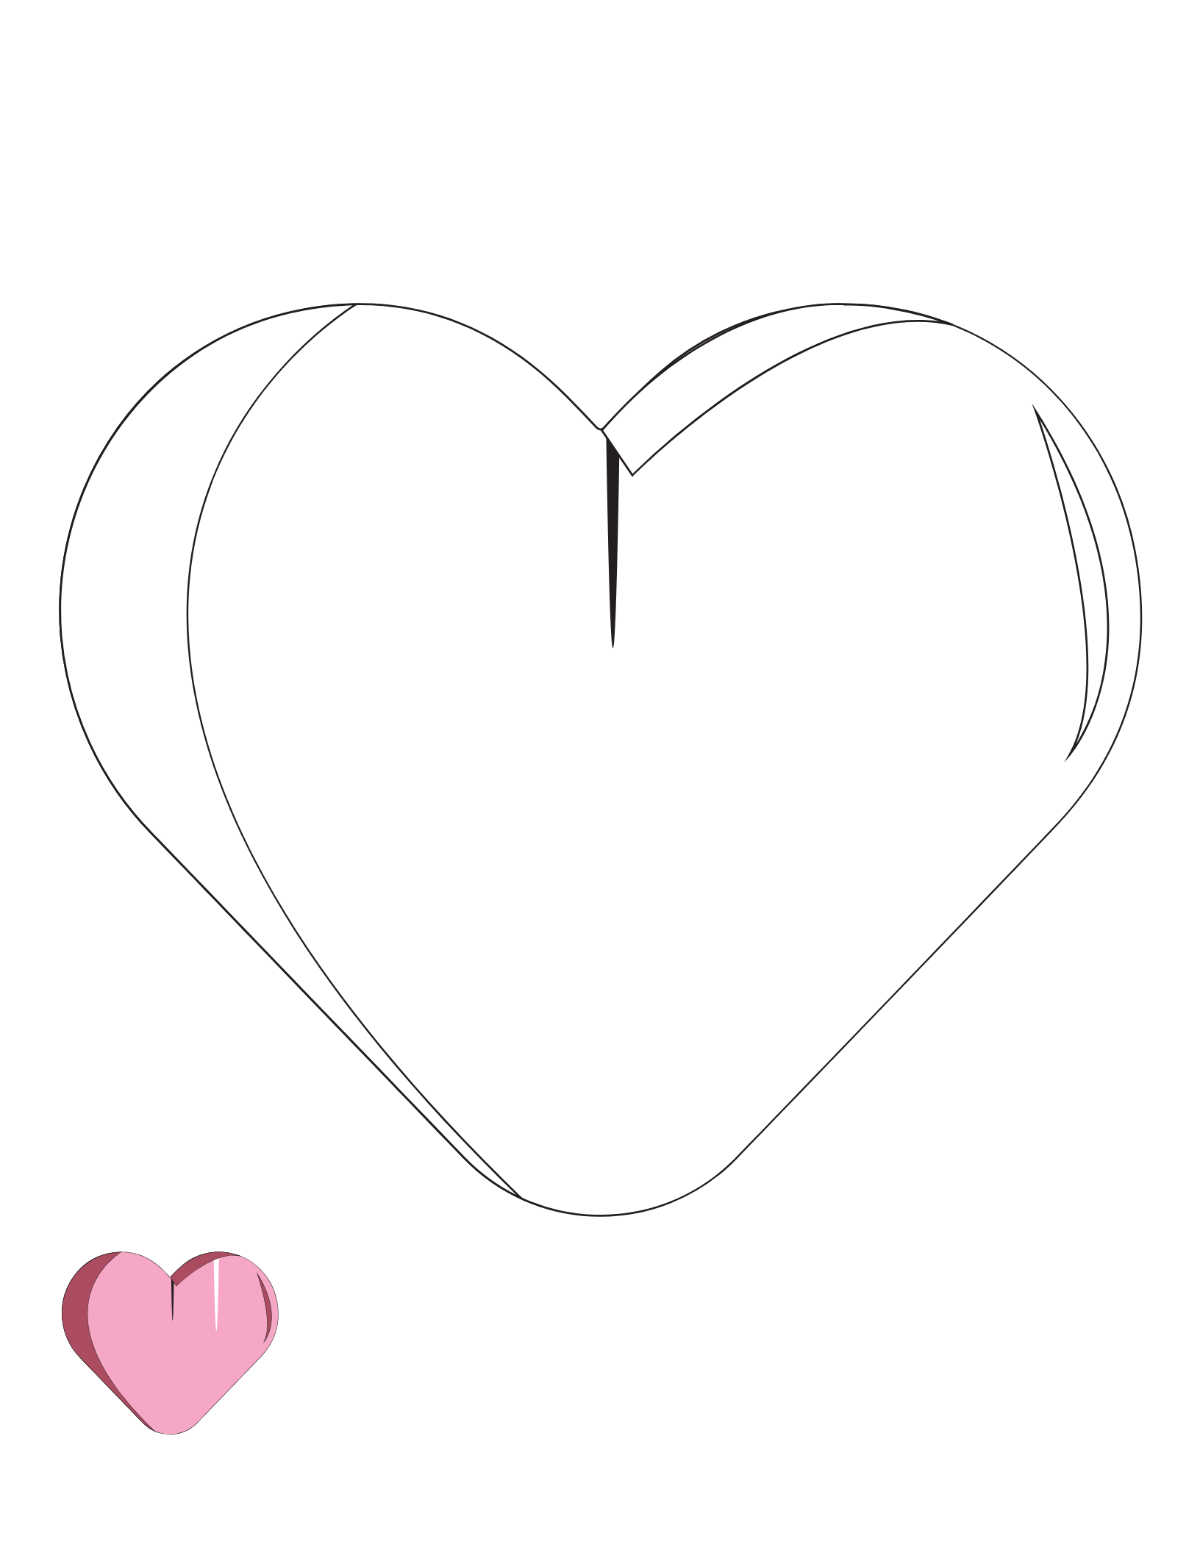 3D Heart Coloring Page Template